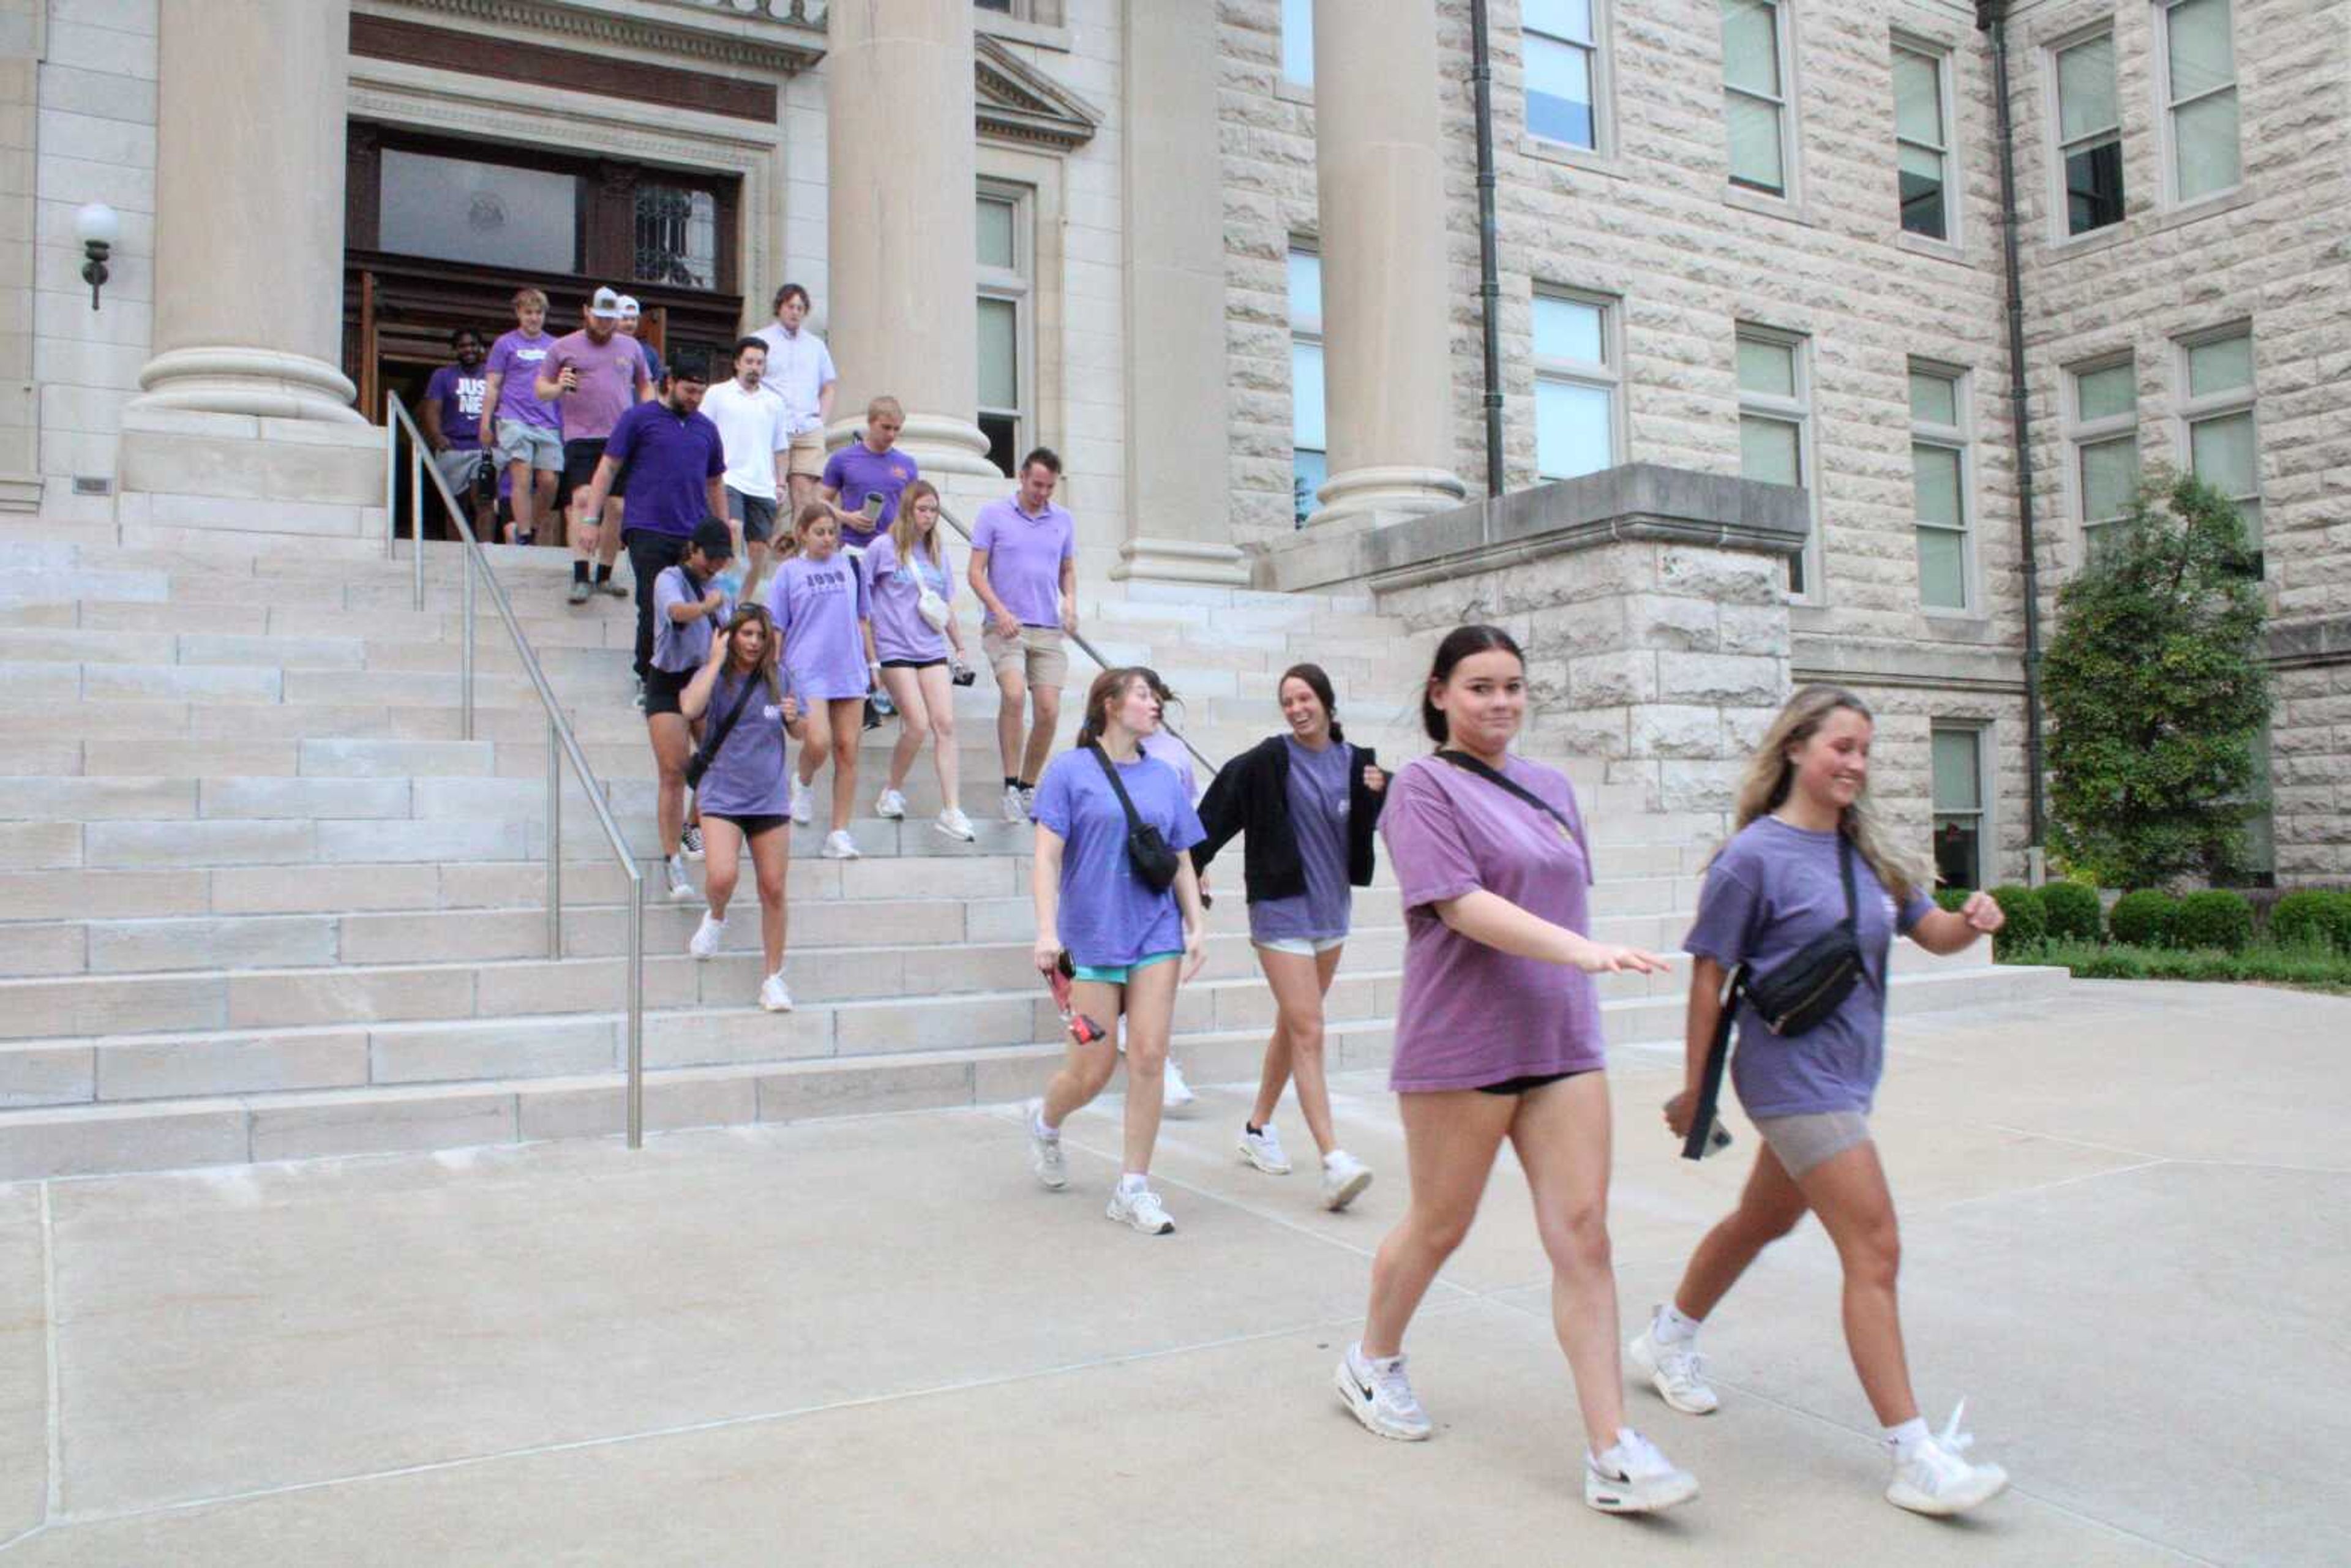 Greek Life students leaving the Greek Connections presentation to start their one mile walk around campus. The presentation was given by Safe House Director Kim Dickson.
